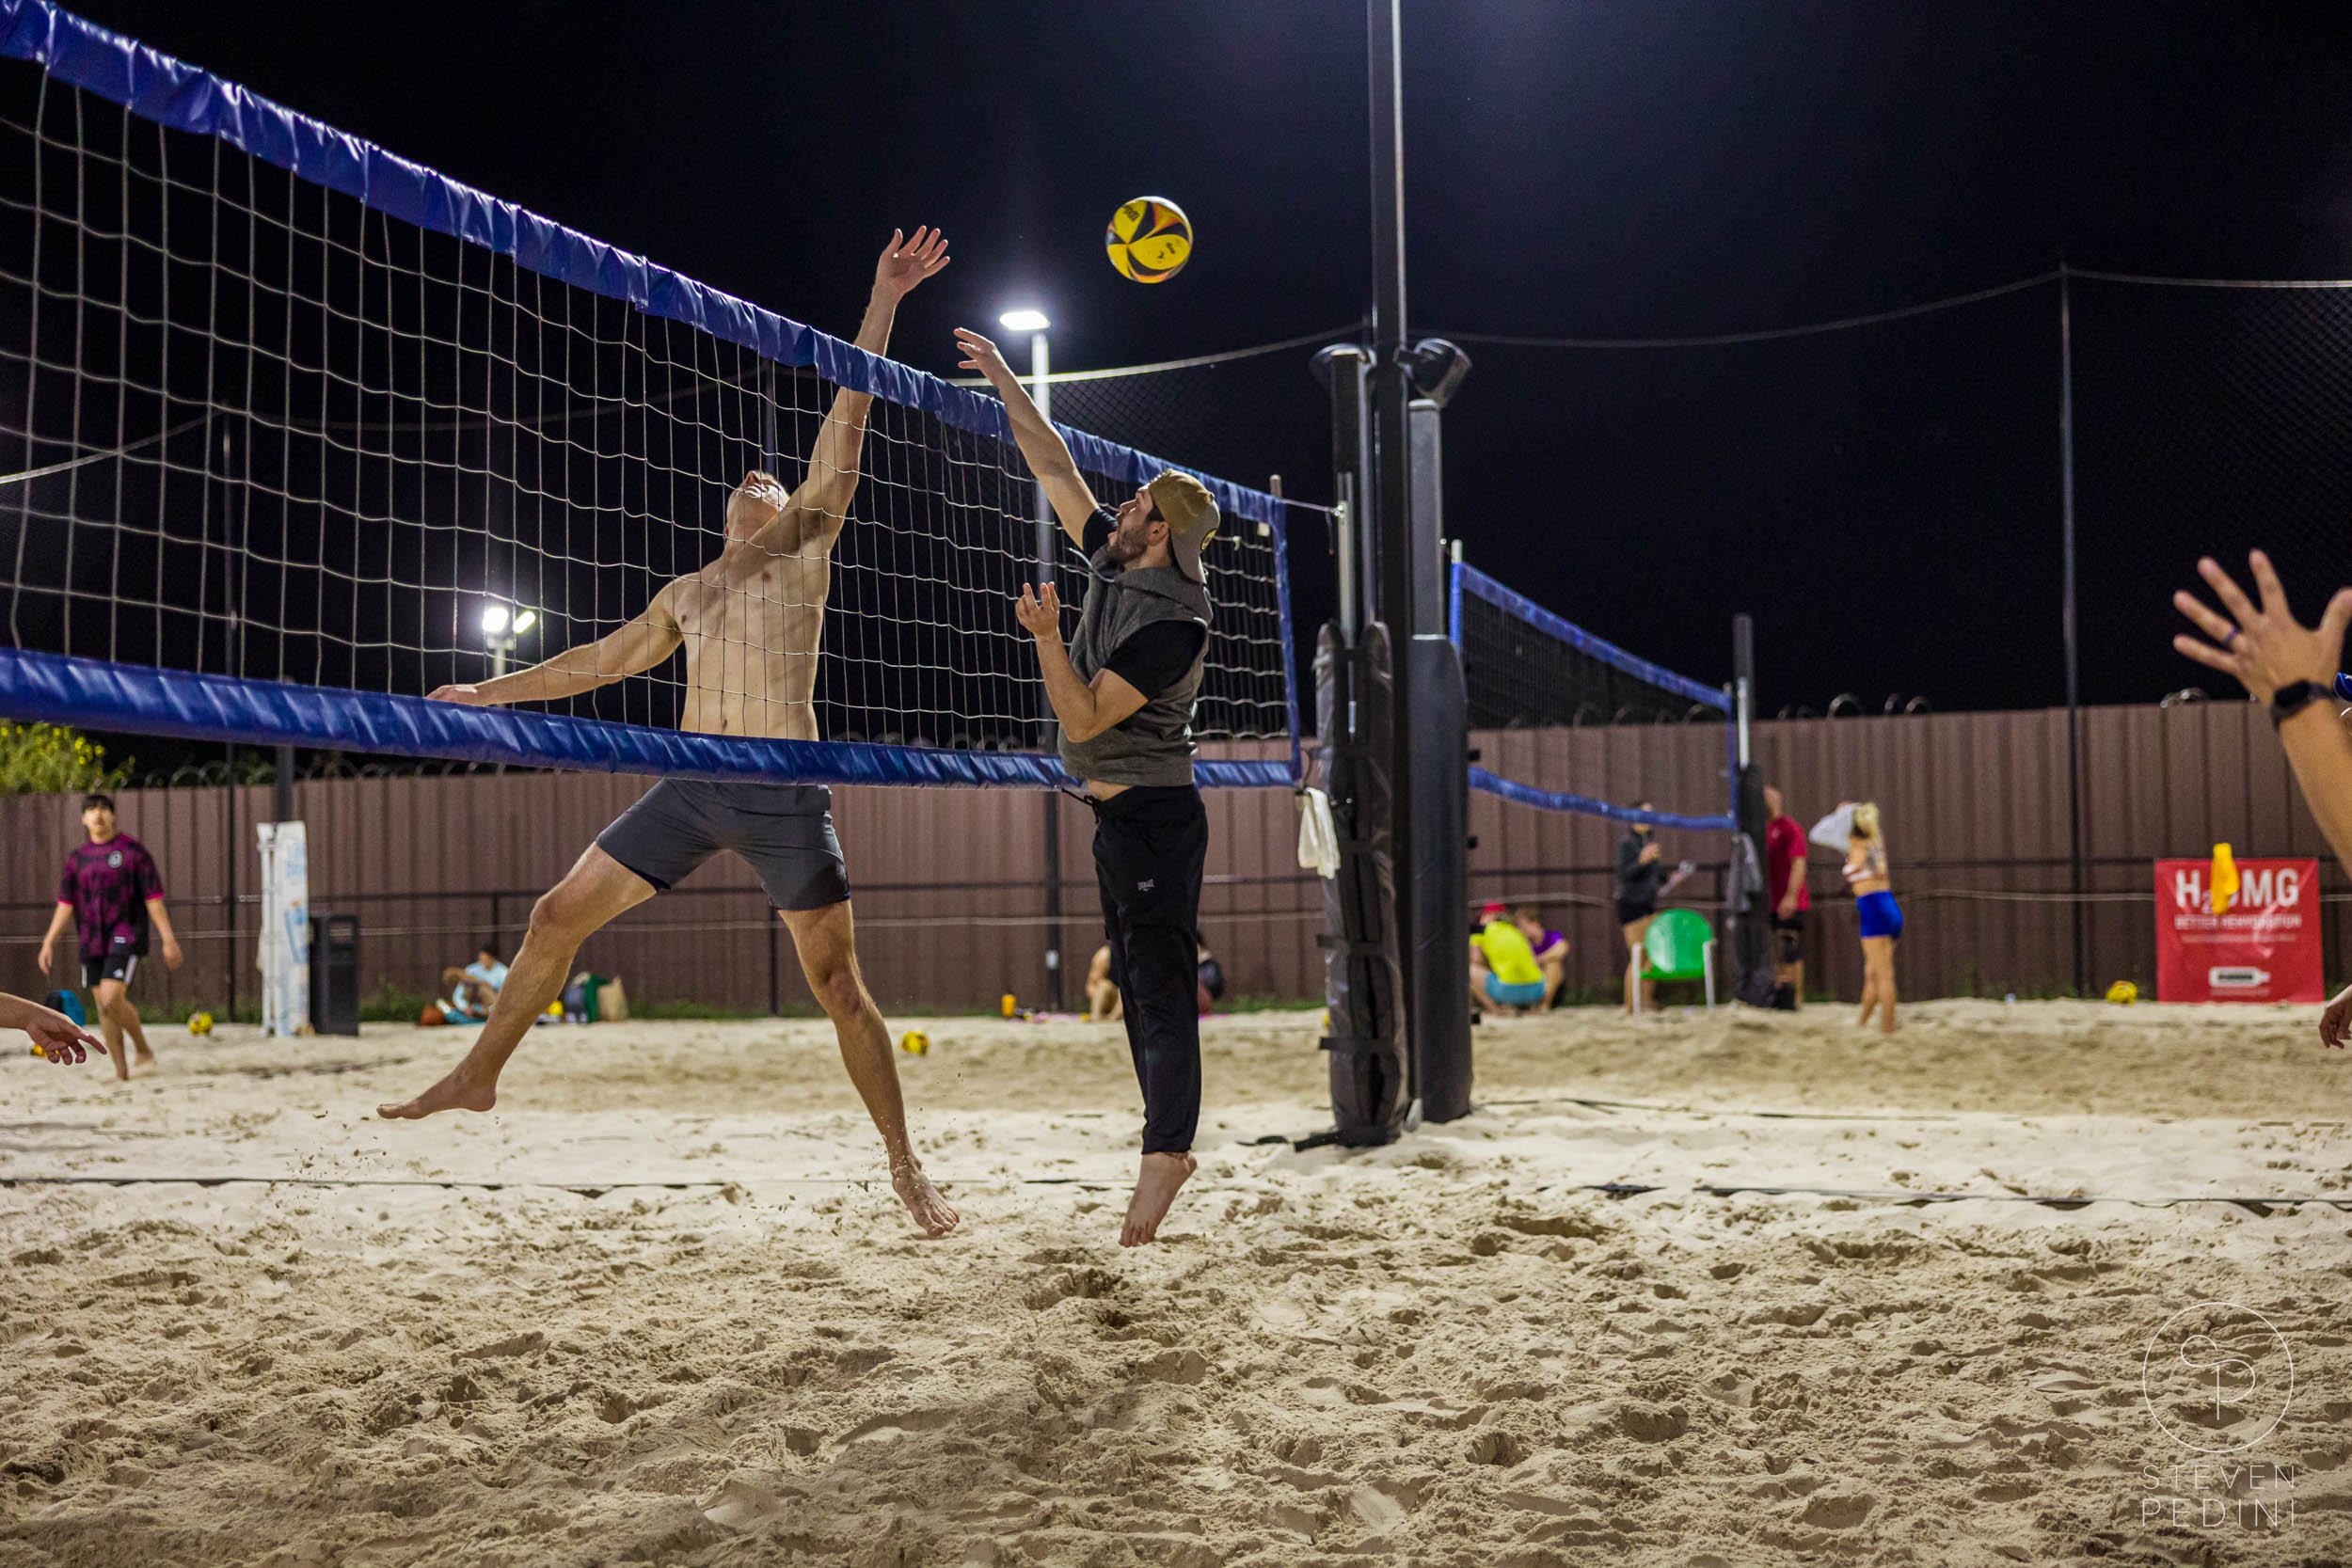 Steven Pedini Photography - Bumpy Pickle - Sand Volleyball - Houston TX - World Cup of Volleyball - 00393.jpg